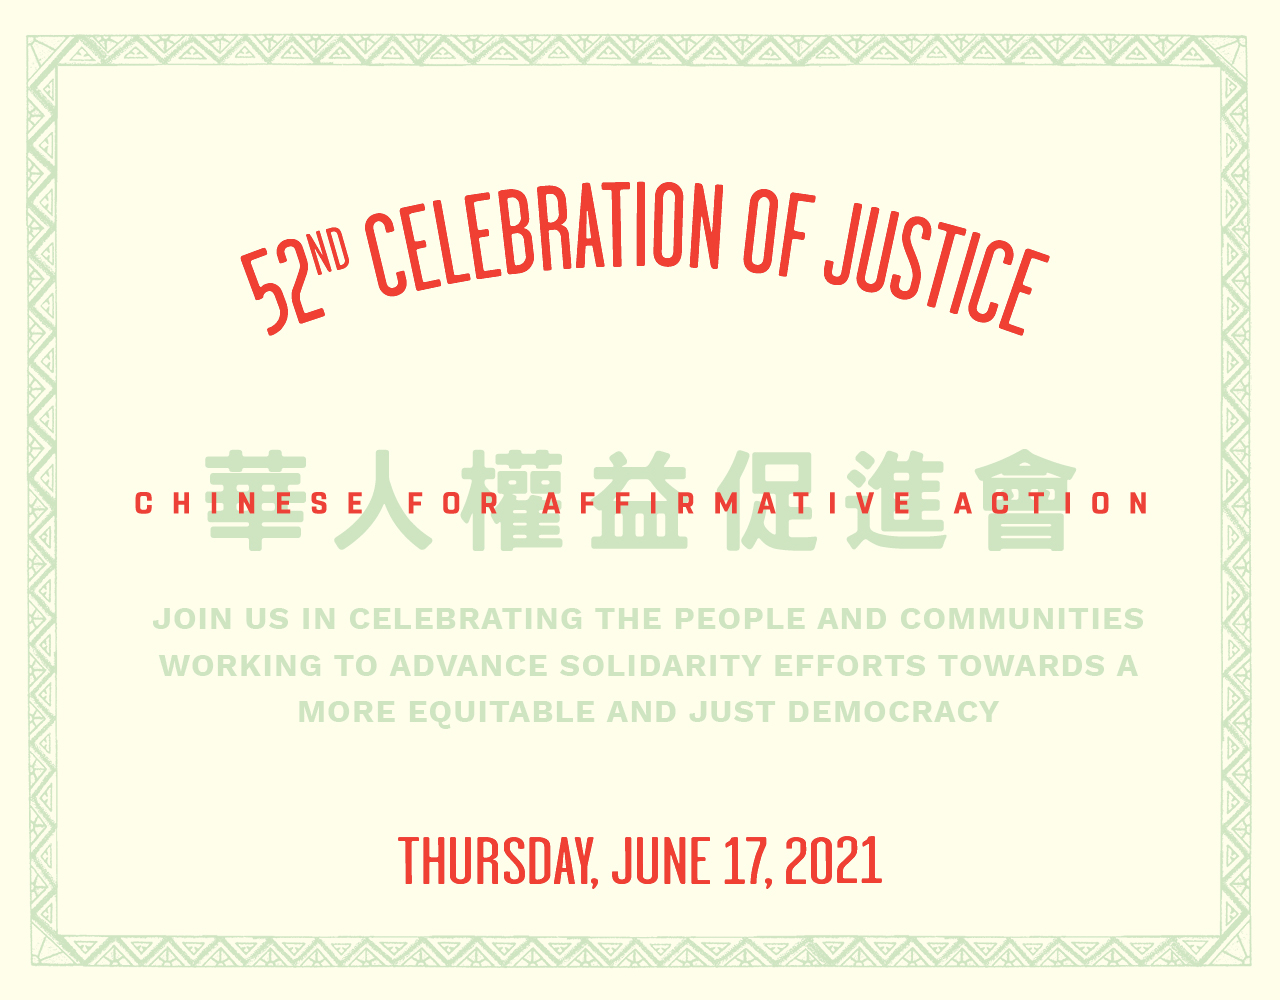 On Thursday, June 17, we are bringing CAA’s dynamic virtual gala to the comfort of your home. No matter where you live, we hope you will join us for a memorable evening in celebrating the people and communities leading the struggle for civil rights and racial justice.